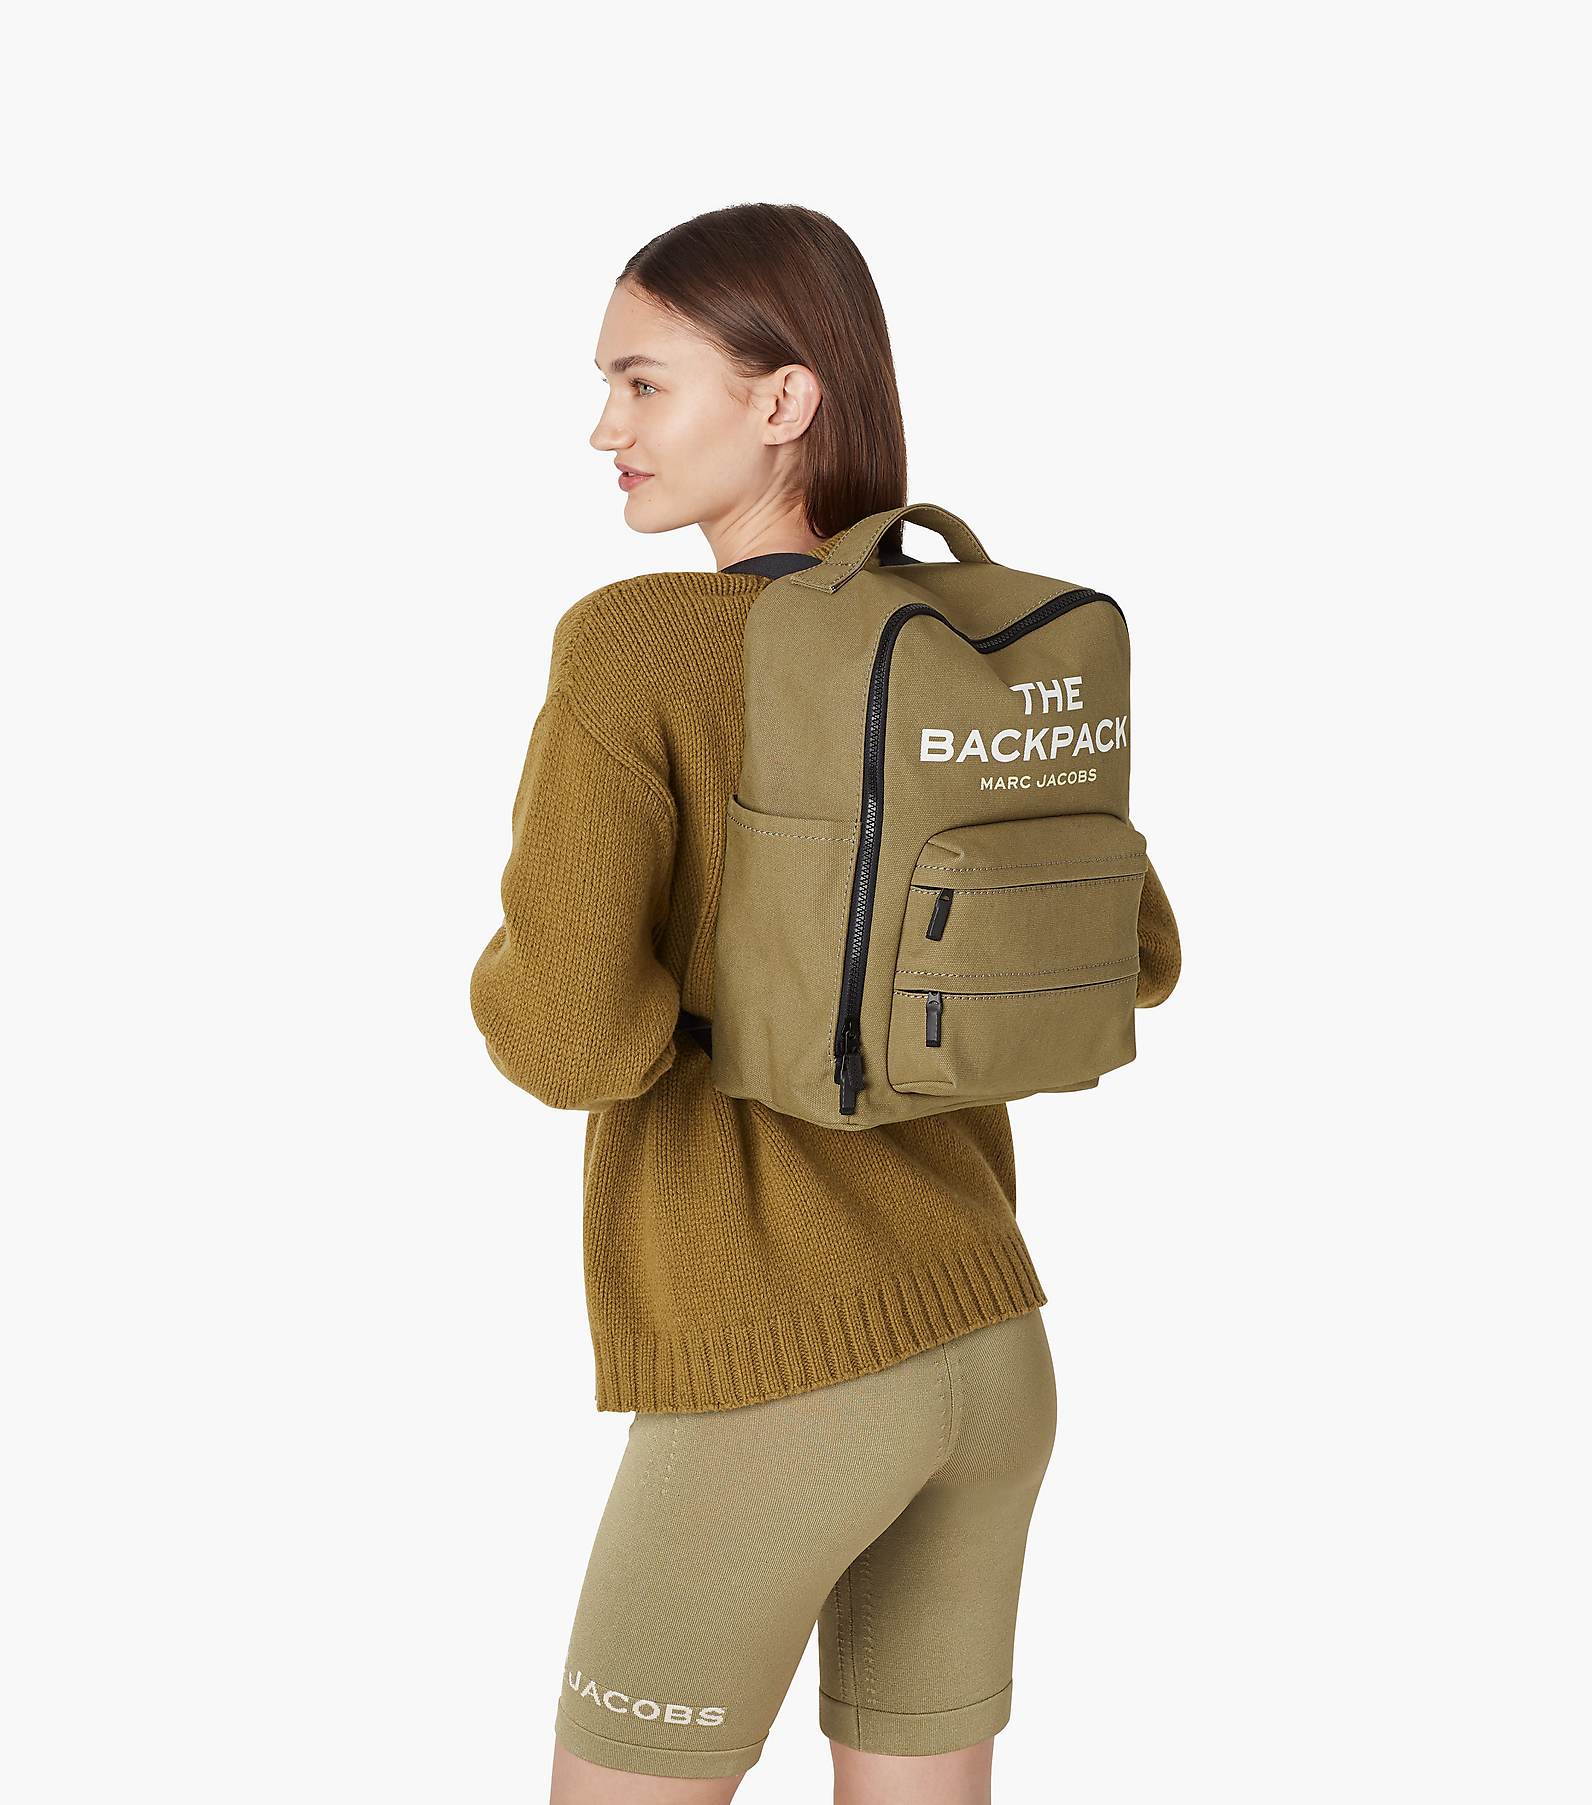 The Backpack | Marc Jacobs | Official Site